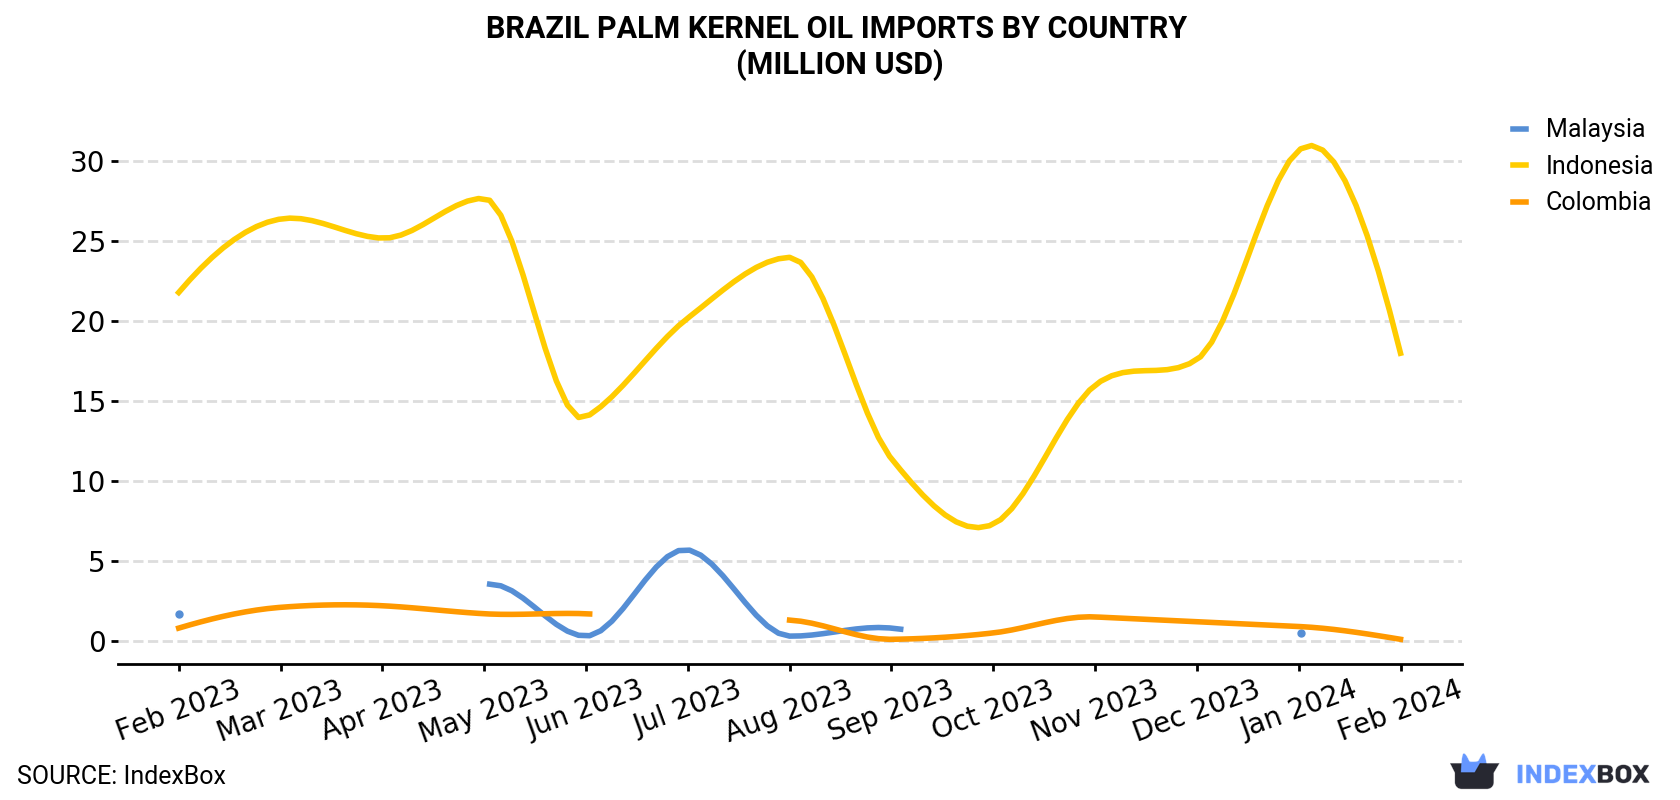 Brazil Palm Kernel Oil Imports By Country (Million USD)